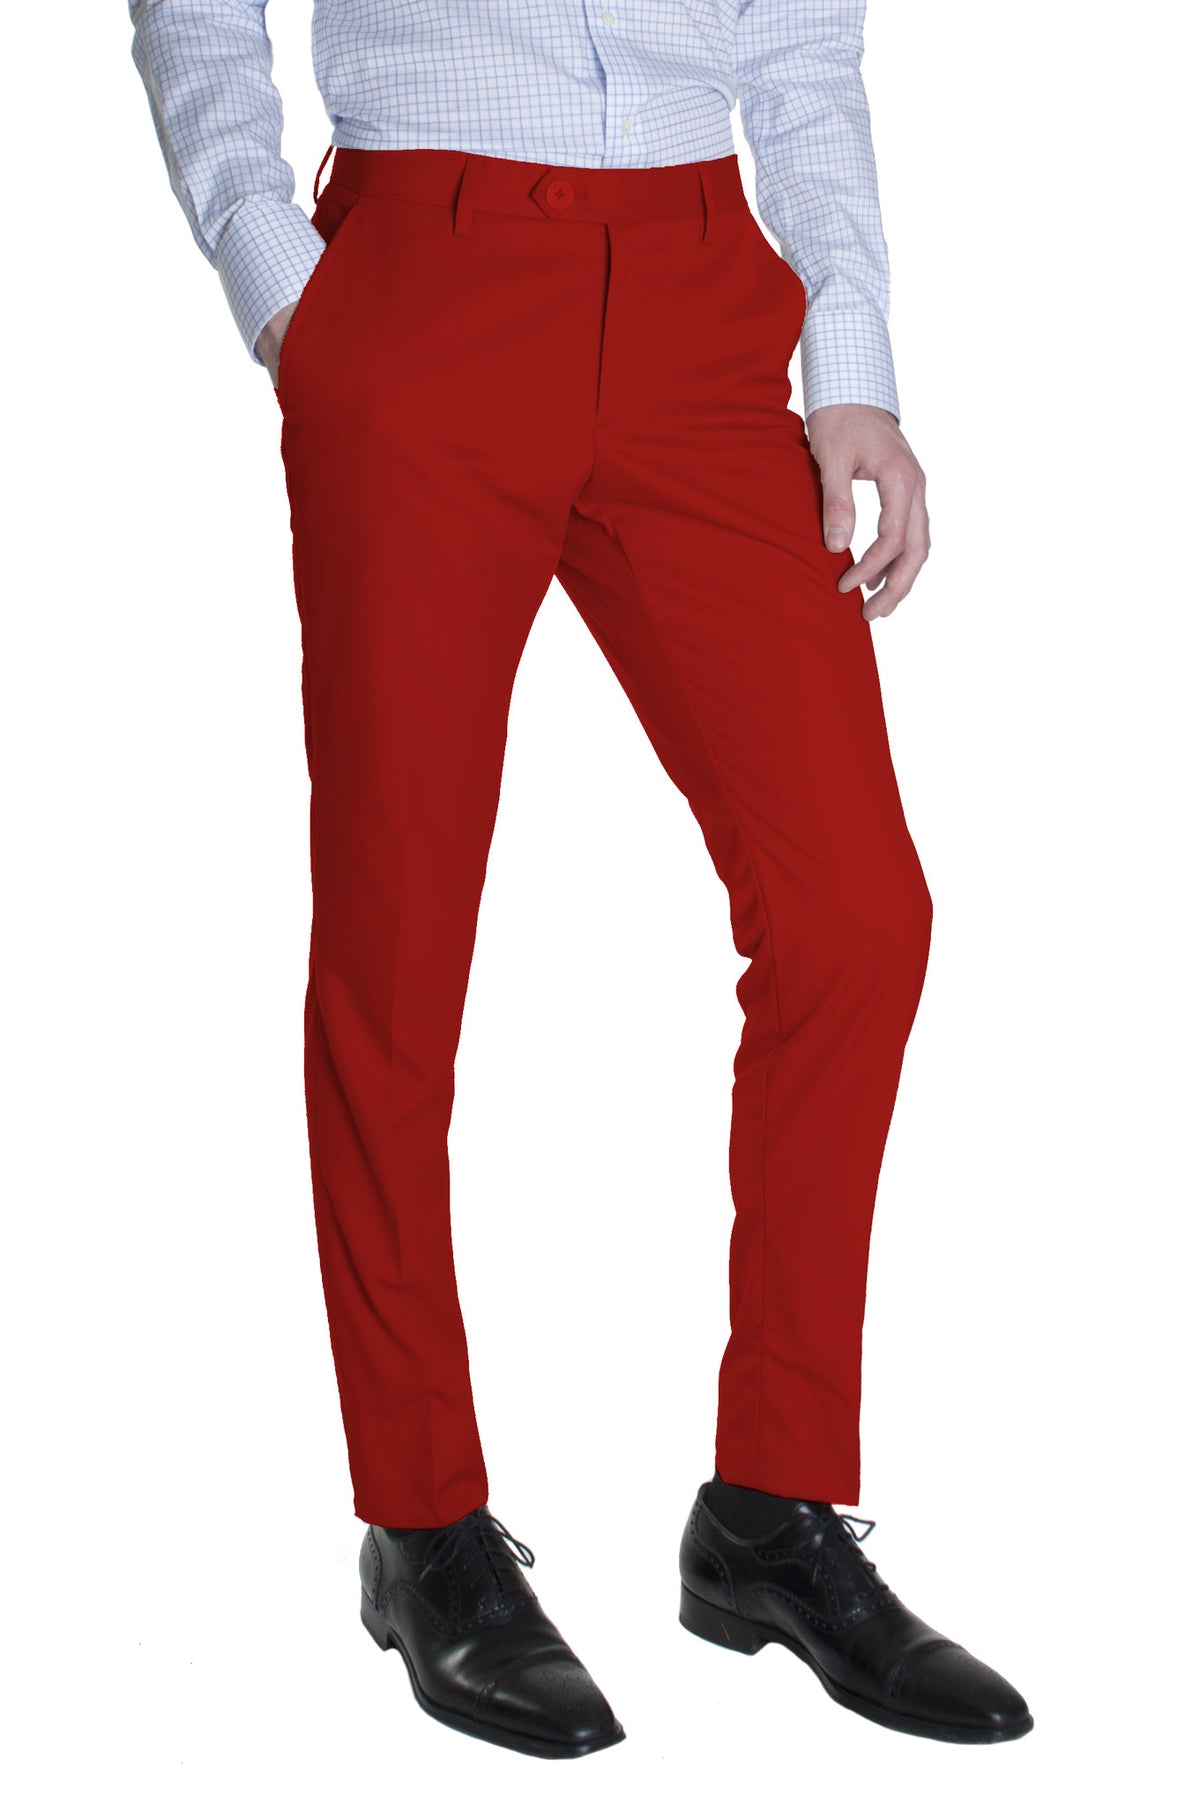 Wide trousers - Bright red - Ladies | H&M IN